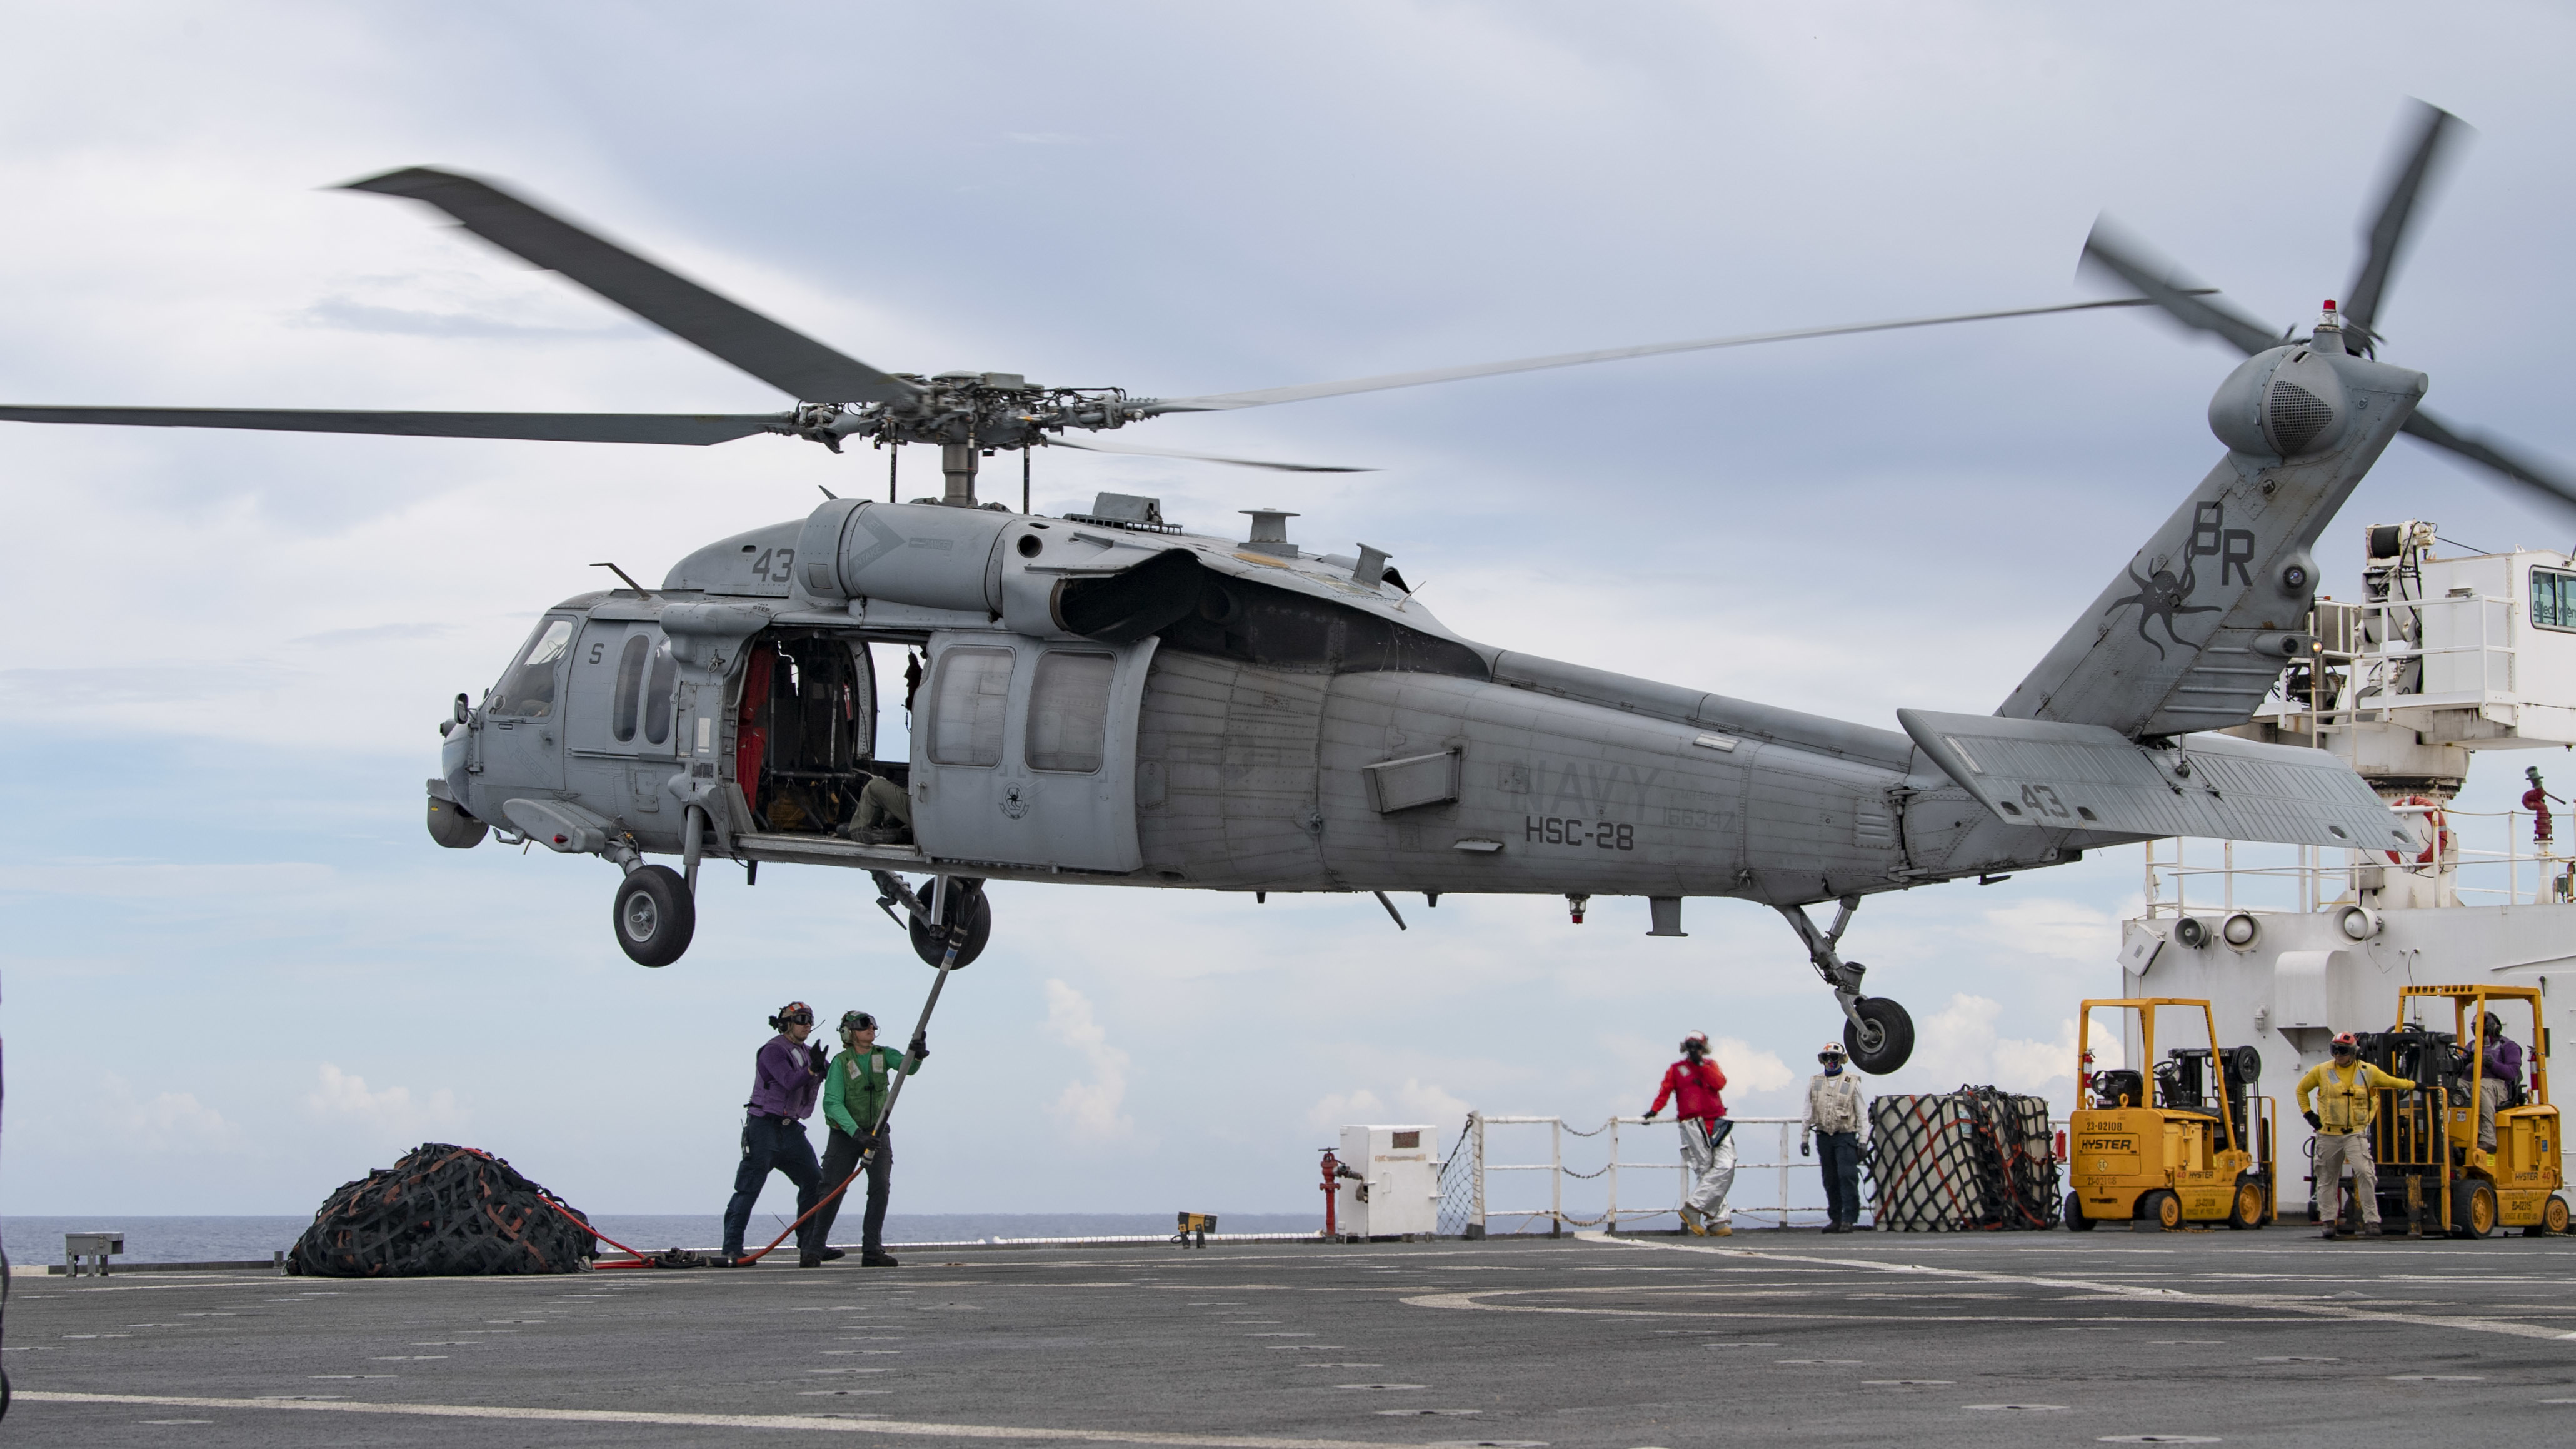 MH-60S Seahawk assigned to the Dragon Whales of Helicopter Sea Combat Squadron 28